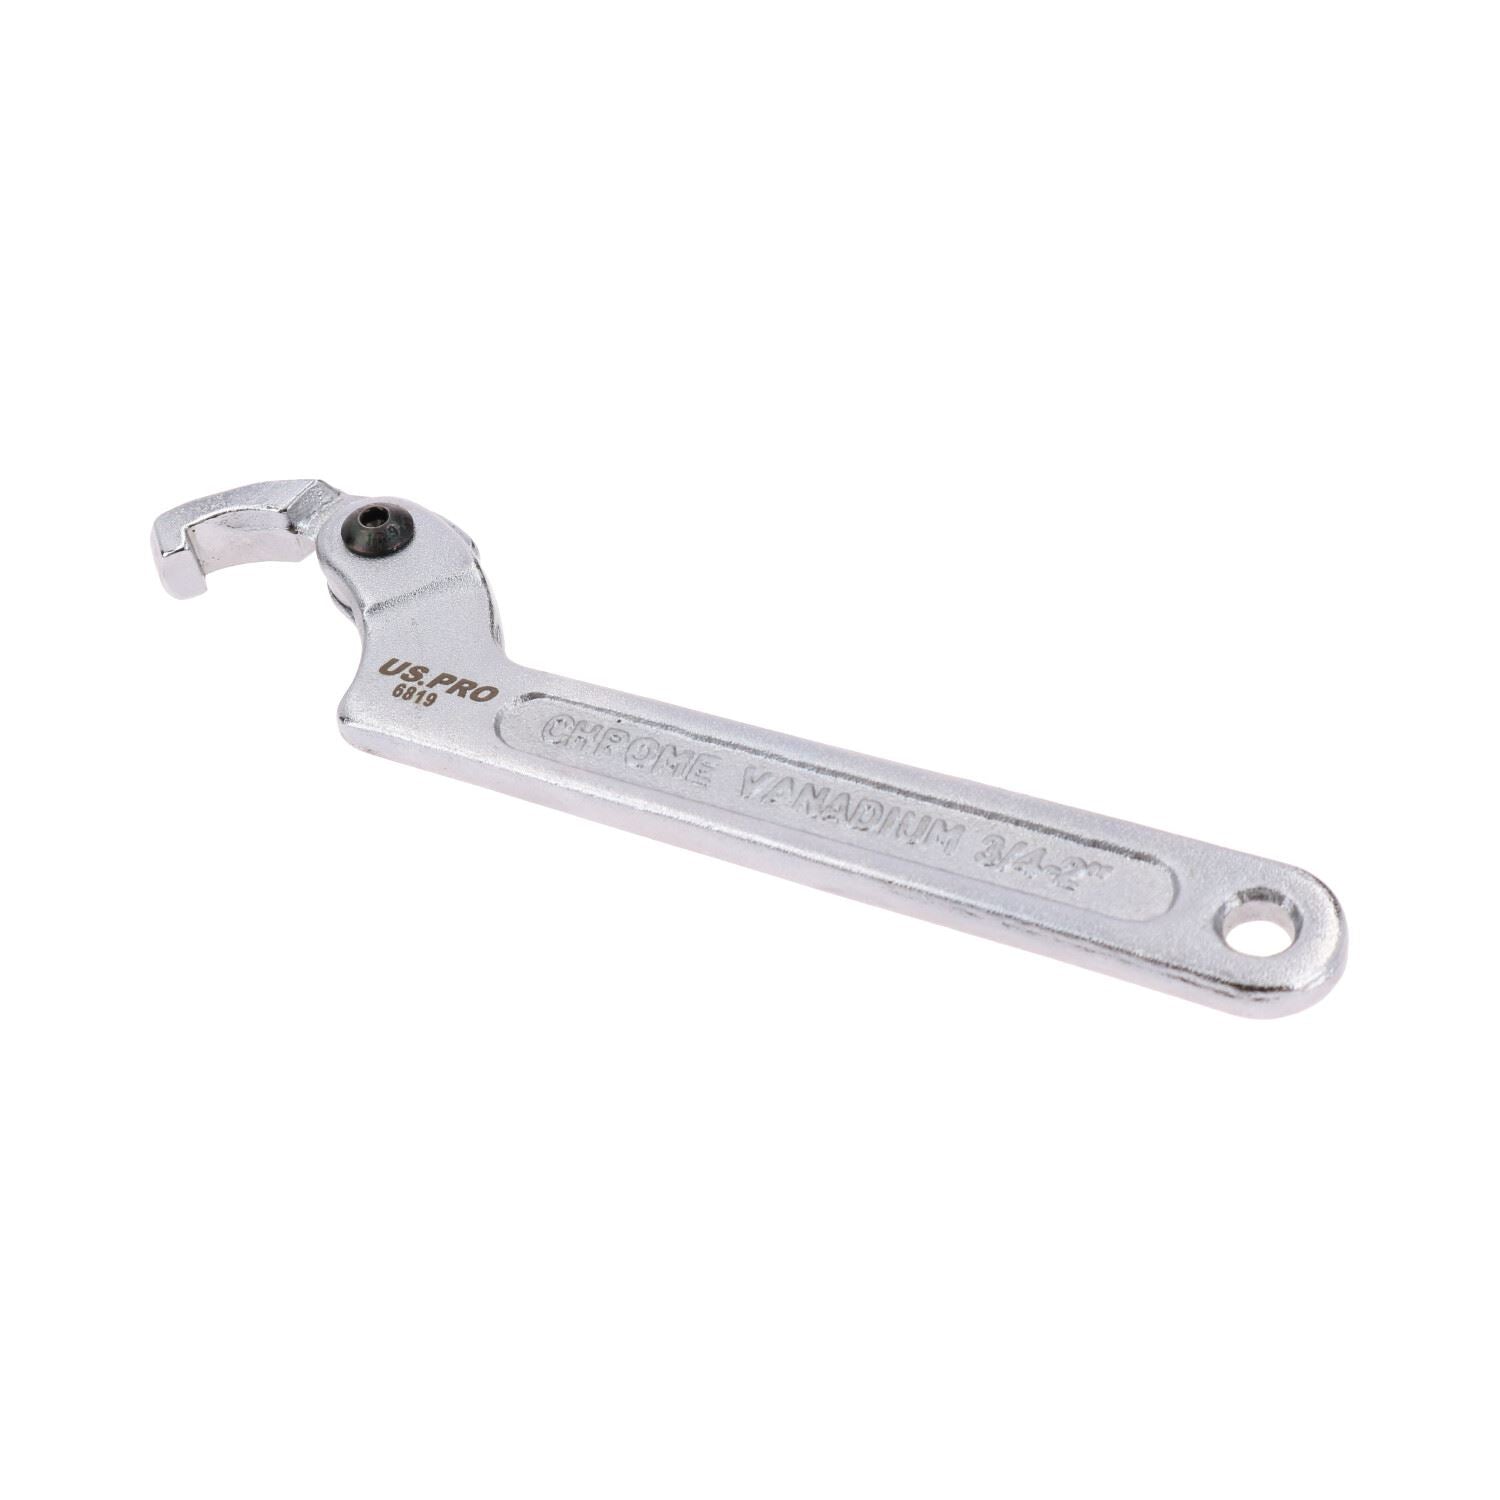 C Spanner Tool Adjustable Hook Wrench